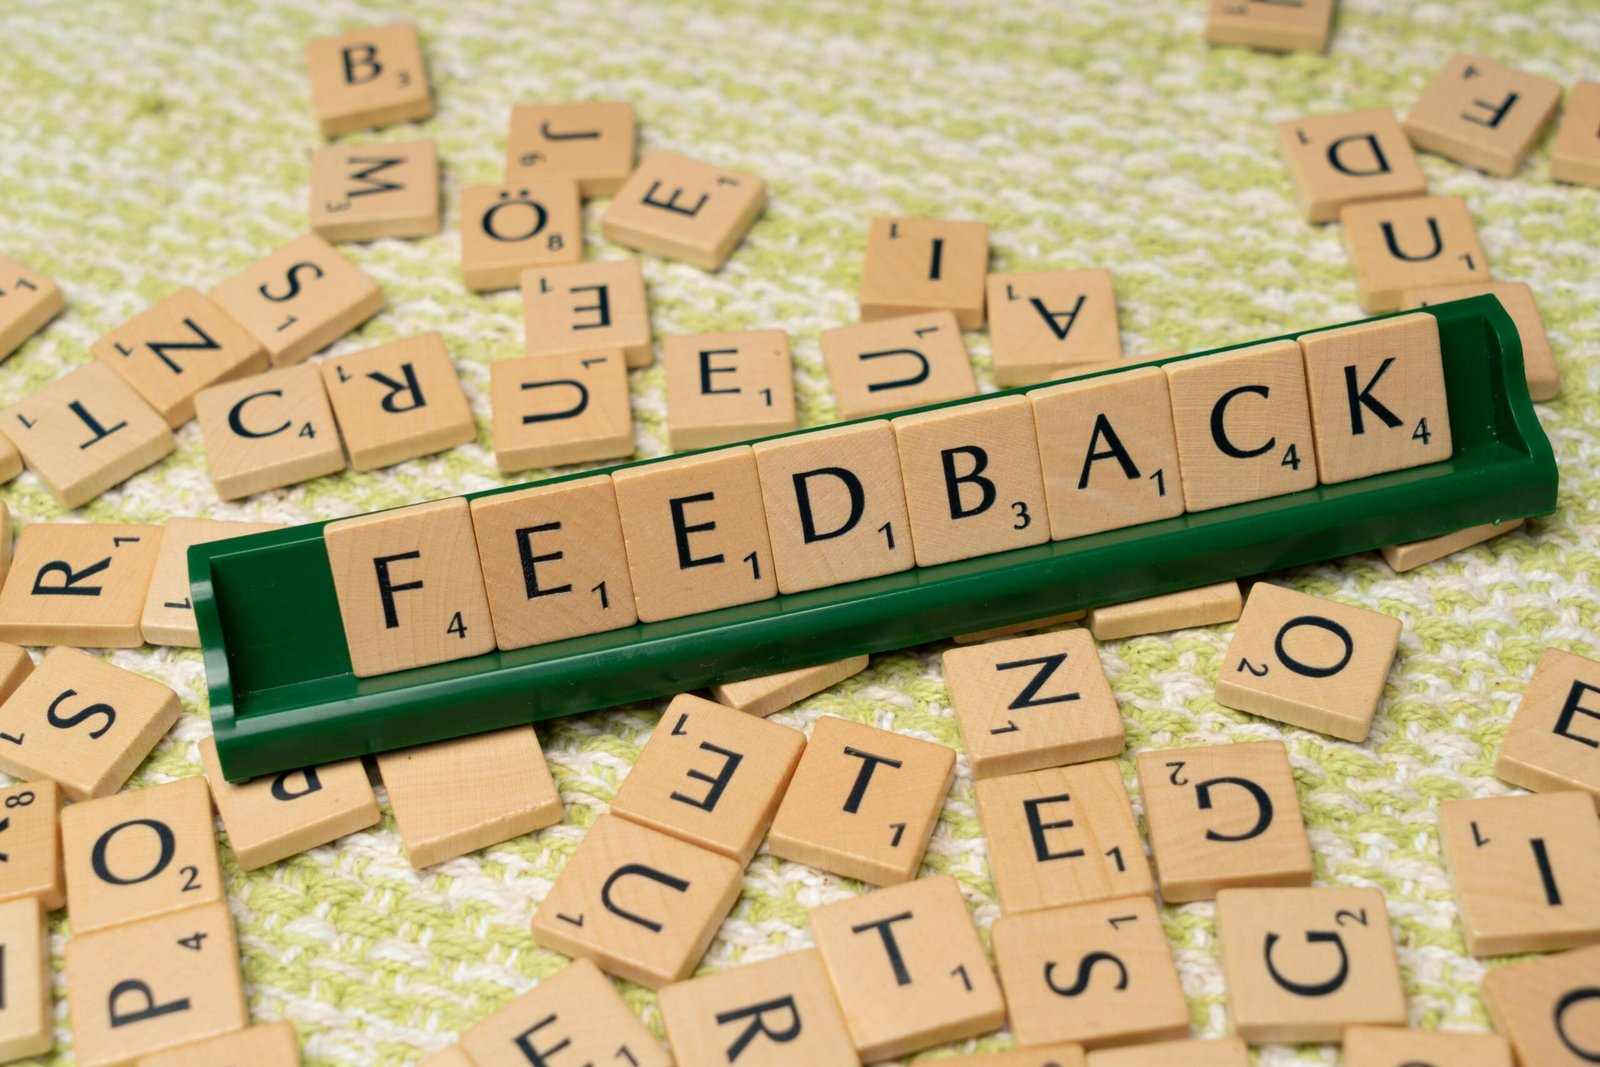 Want happier clients? Learn how to get honest feedback and improve your legal practice.